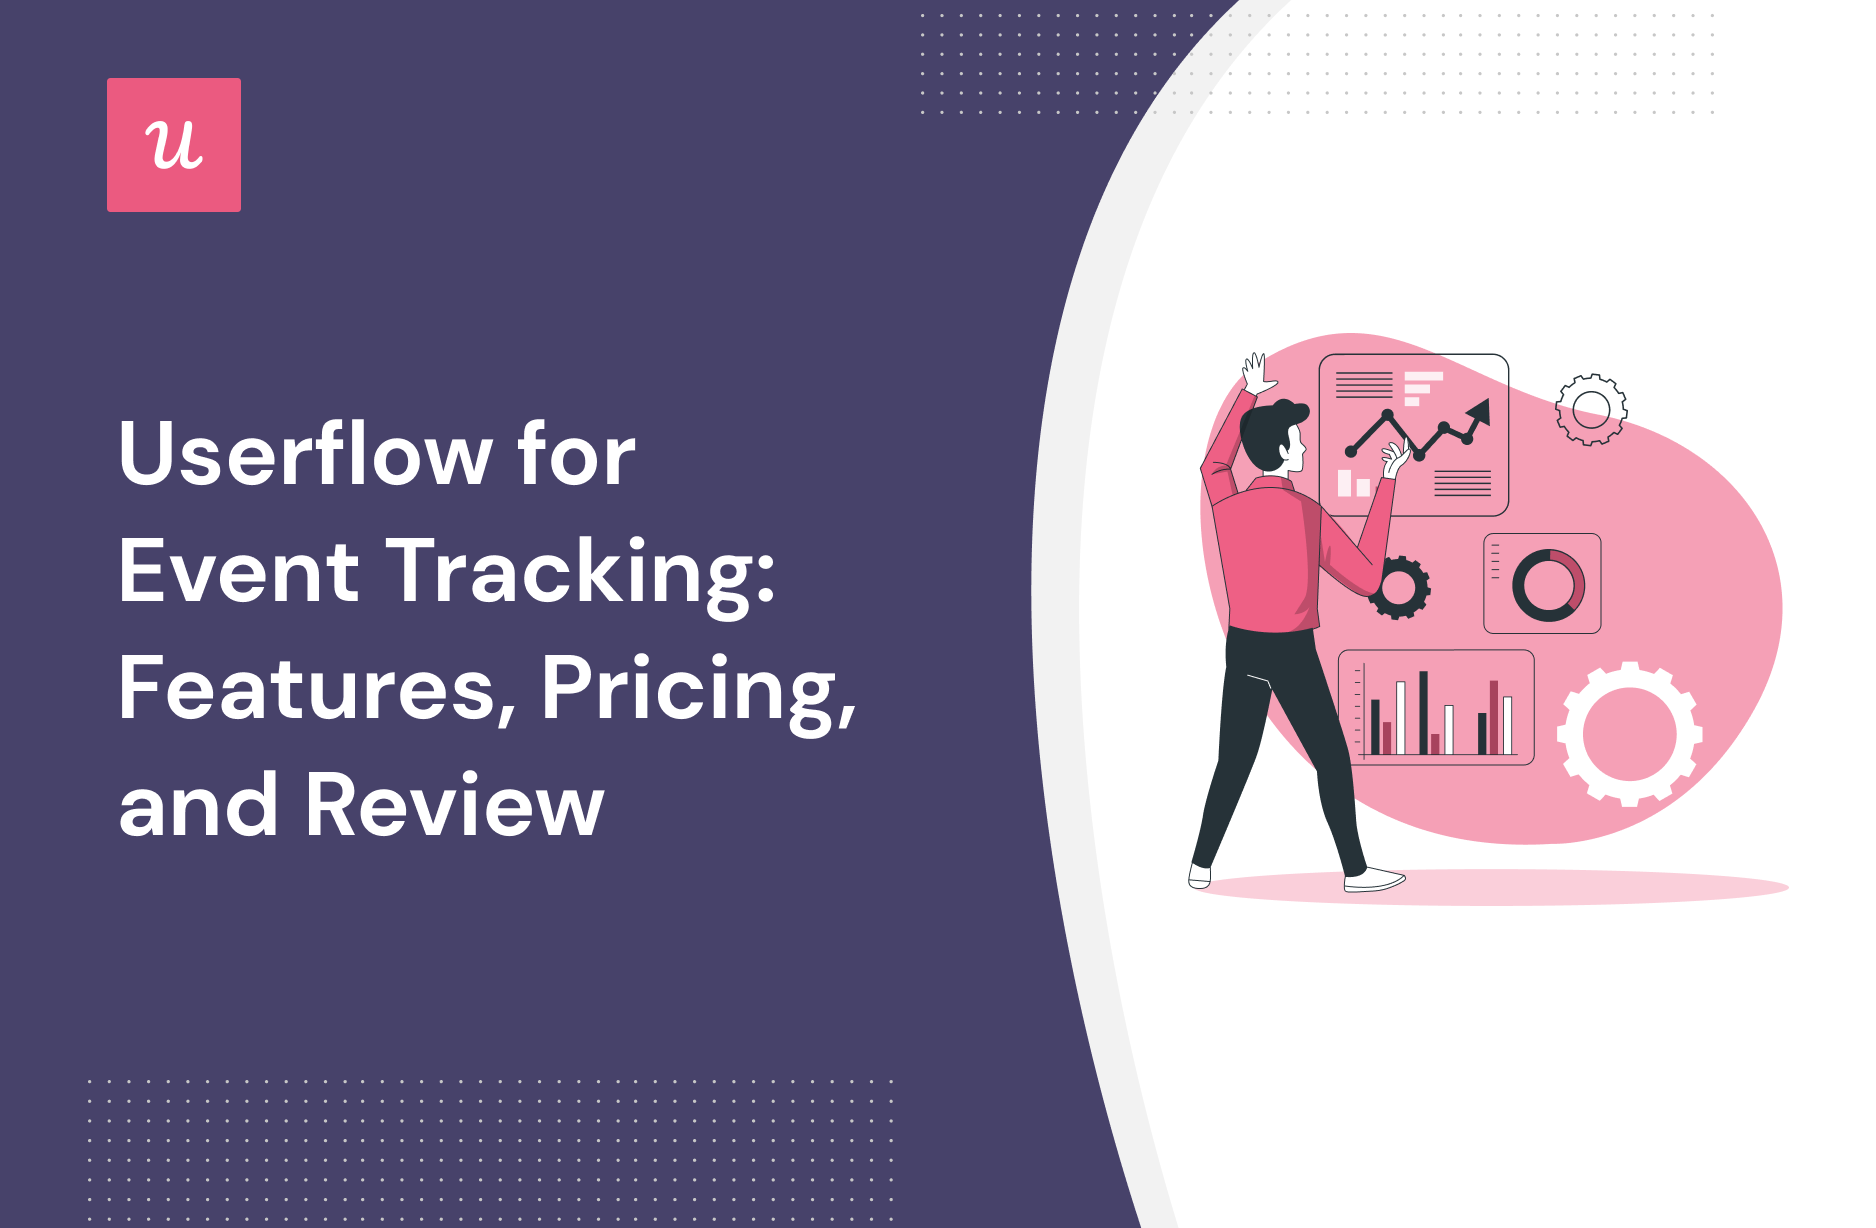 Userflow for Event Tracking: Features, Pricing, and Review